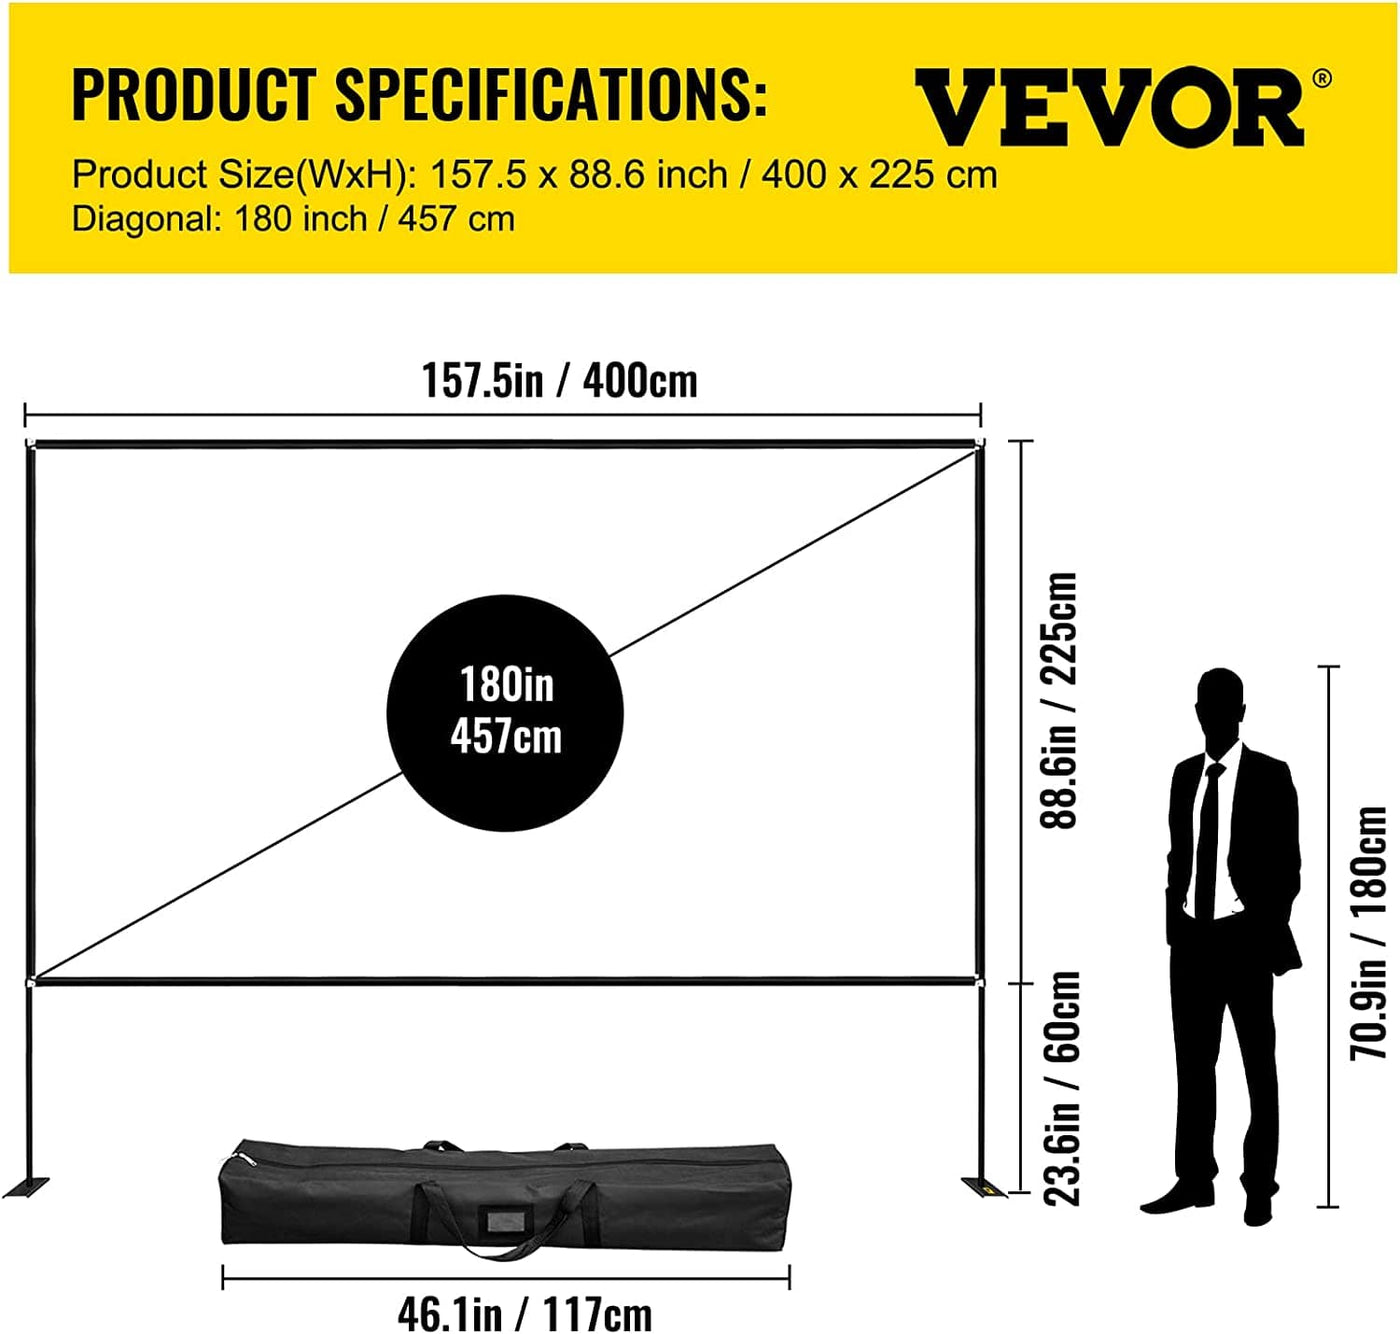 VEVOR 180-Inch Portable Projector Screen with Stand: Ultimate Viewing Experience Anywhere